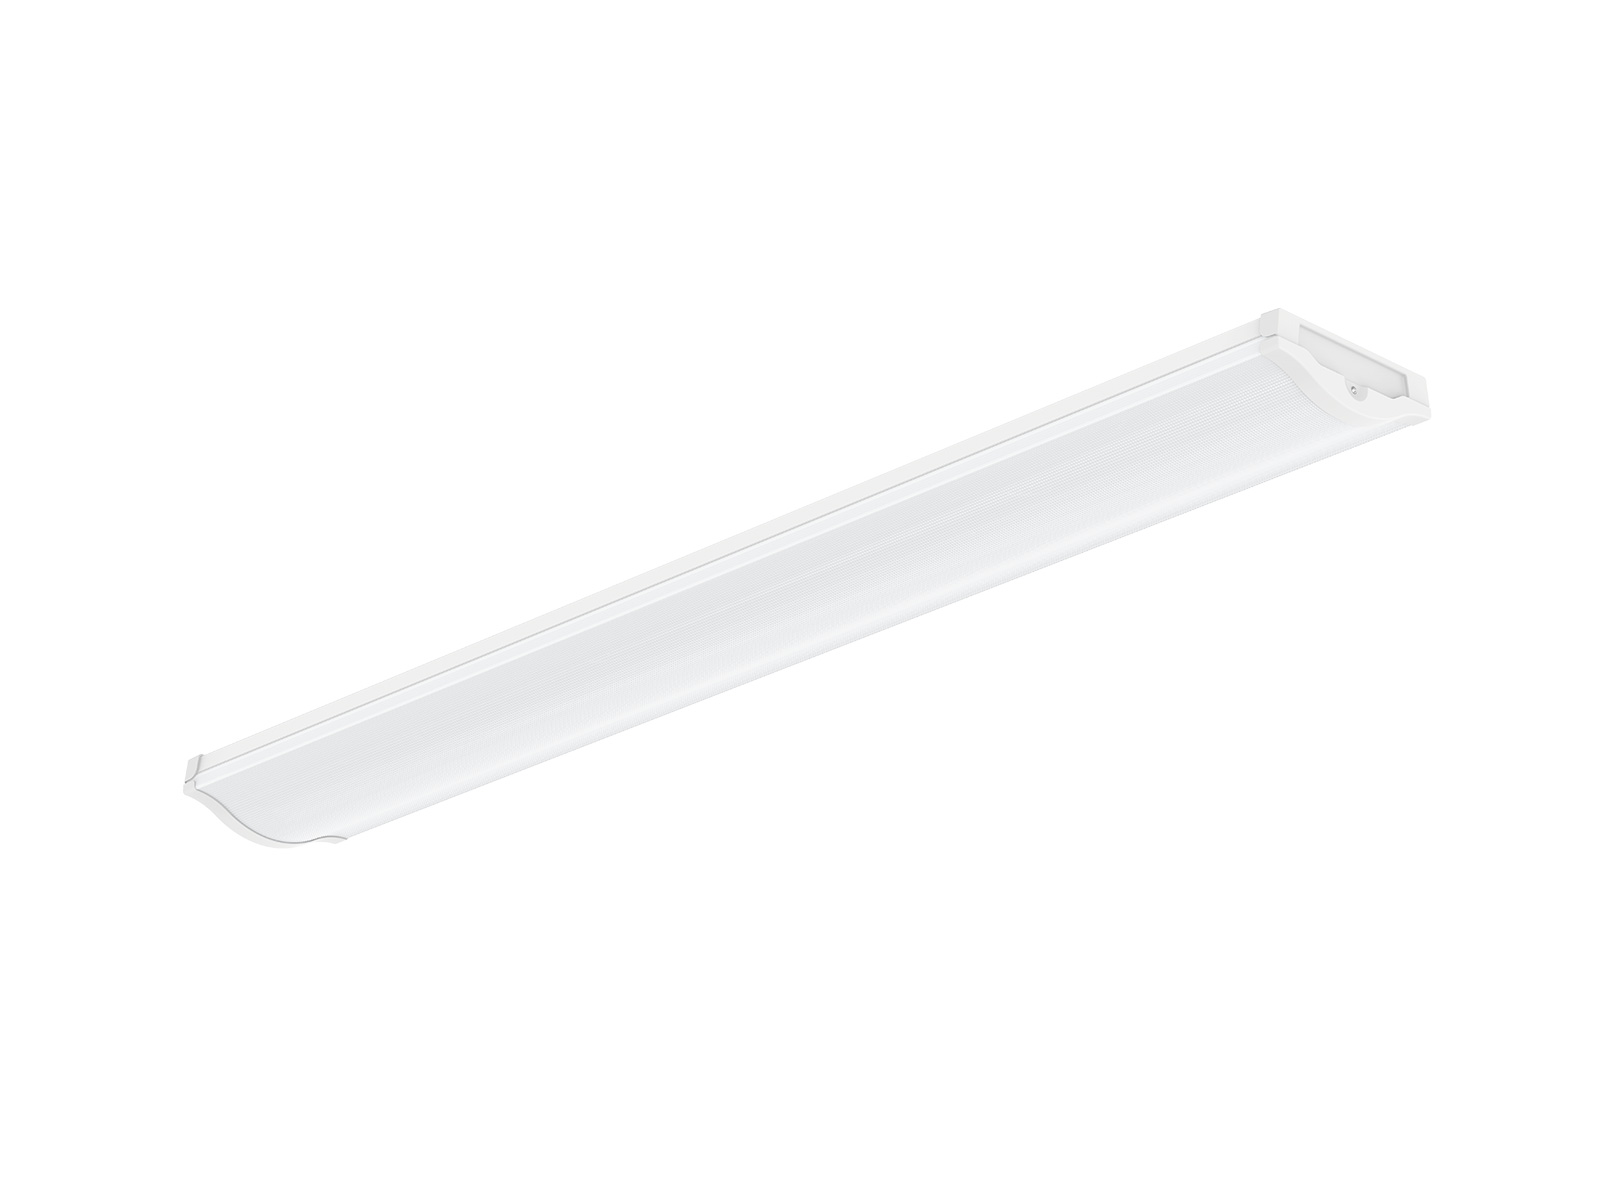 DB106 4ft dimmable linear light fixture